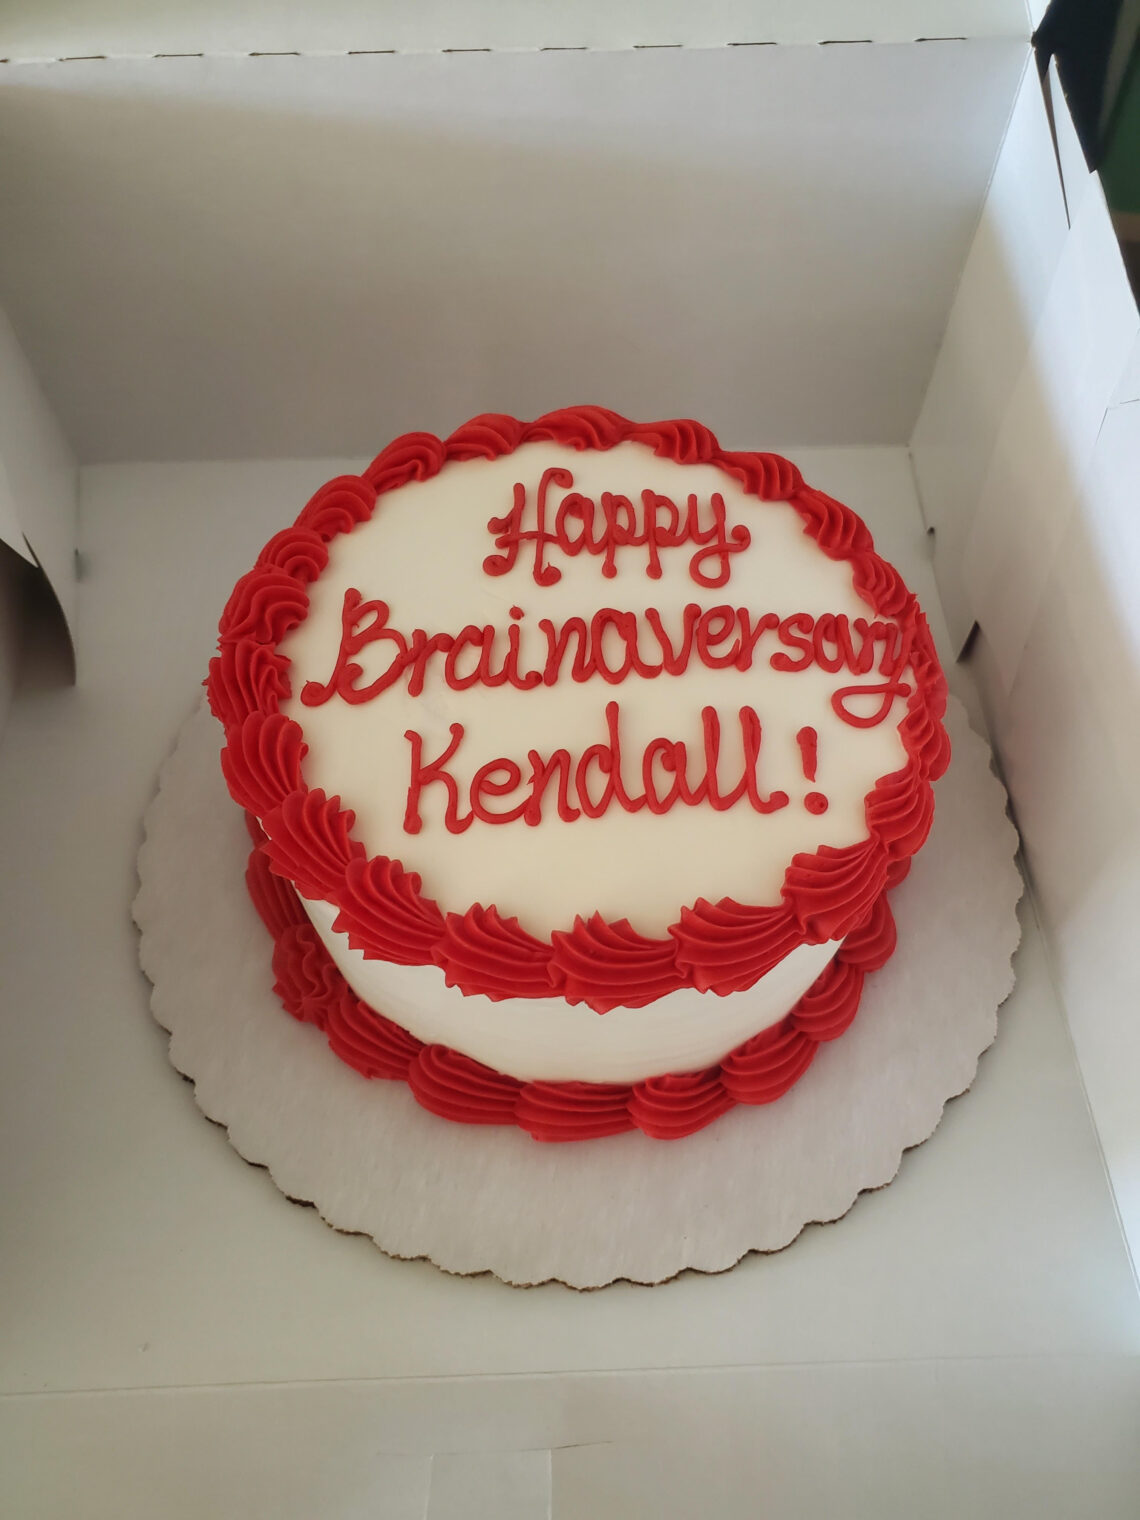 a circular cake with the words ' happy brainaversary kendall!'